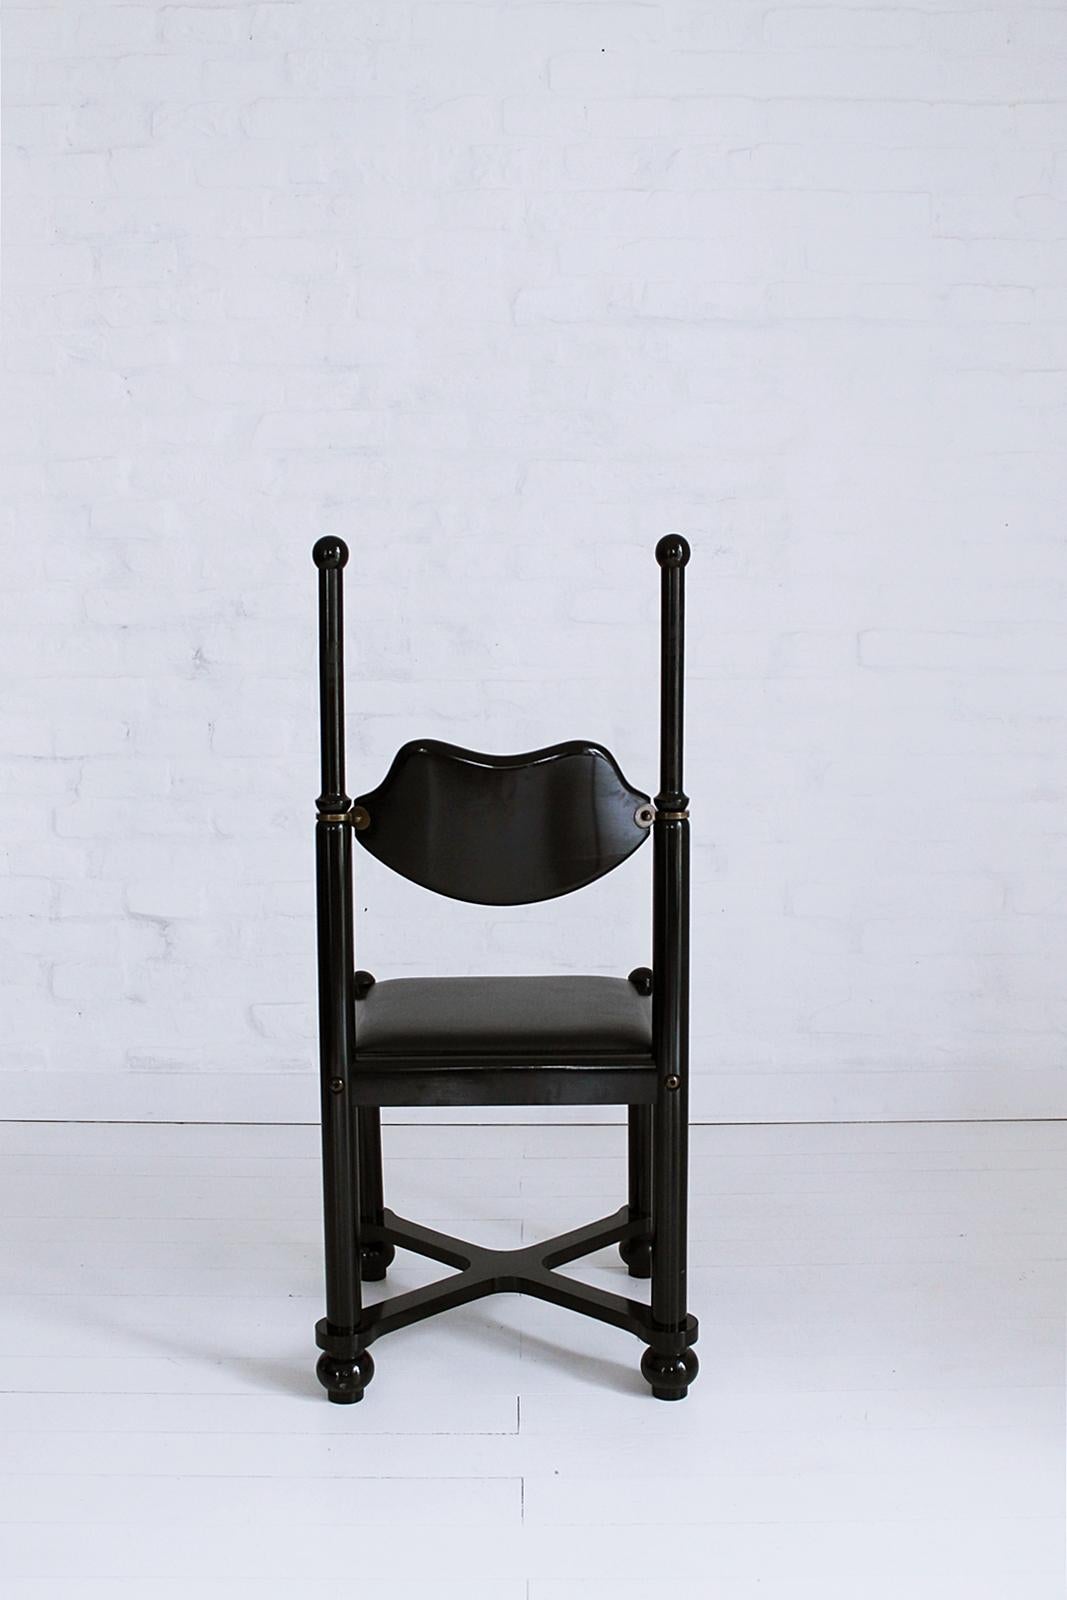 Hand-Crafted Postmodern Studio Chair by Belloni Design, Hungary, 1980s